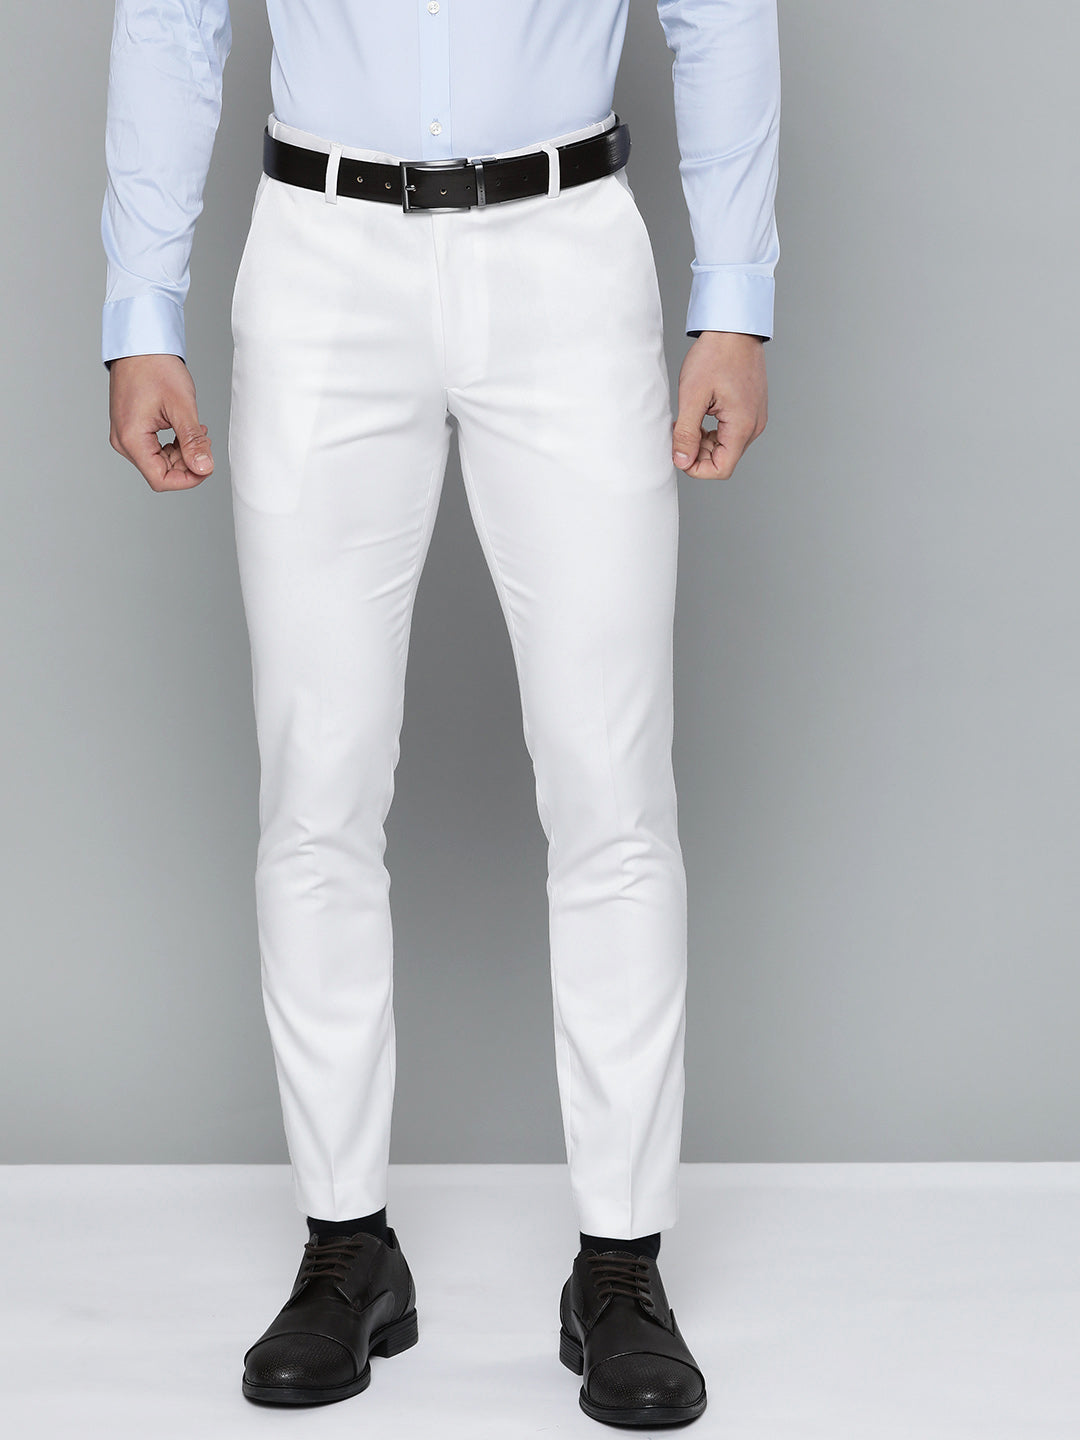 ASOS DESIGN smart tapered linen mix trousers in white | ASOS